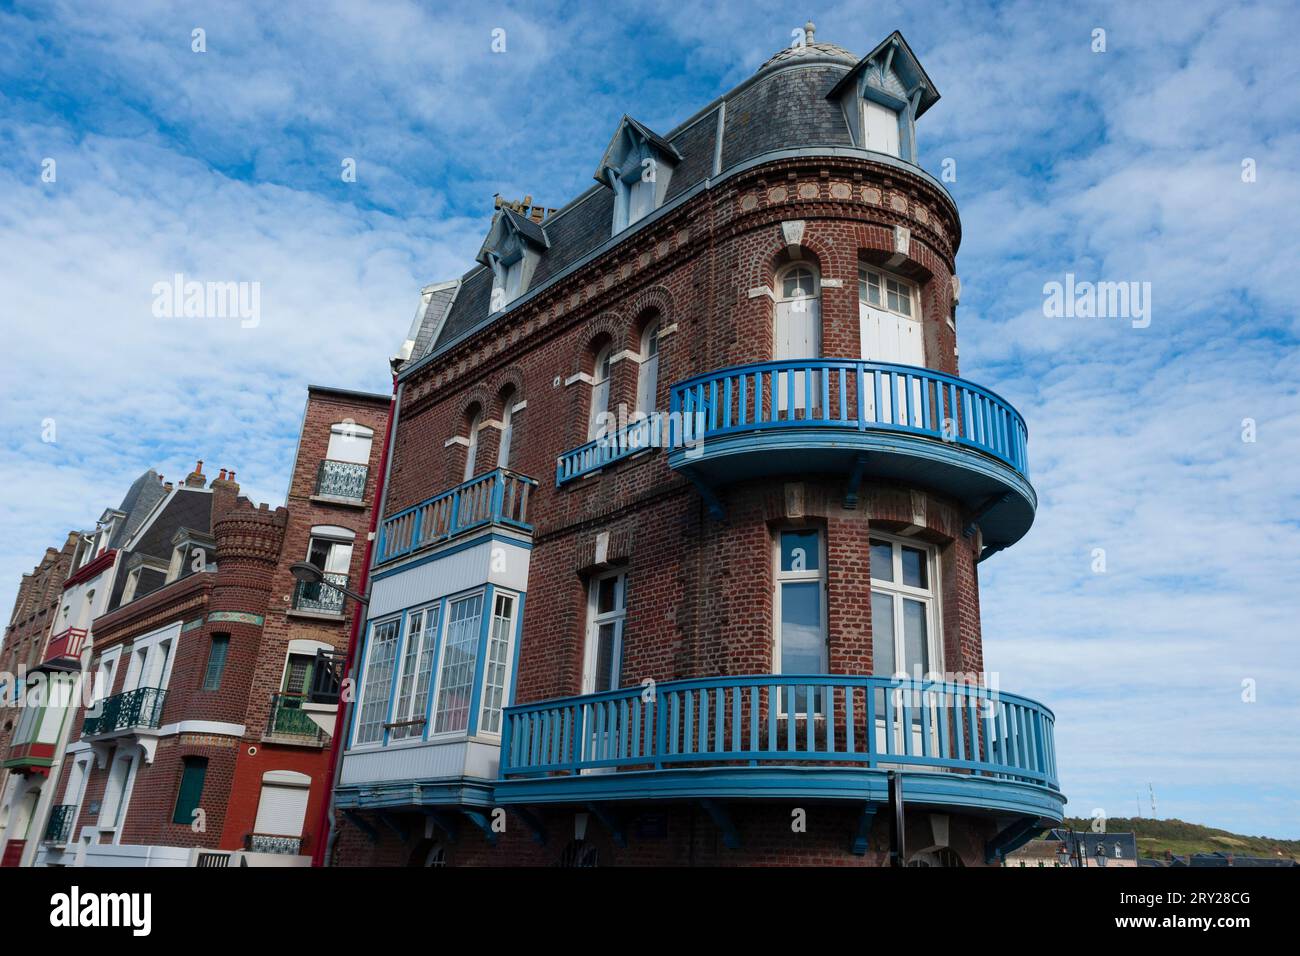 Architektur in Mers-les-Bains, Picardy, Frankreich Stockfoto